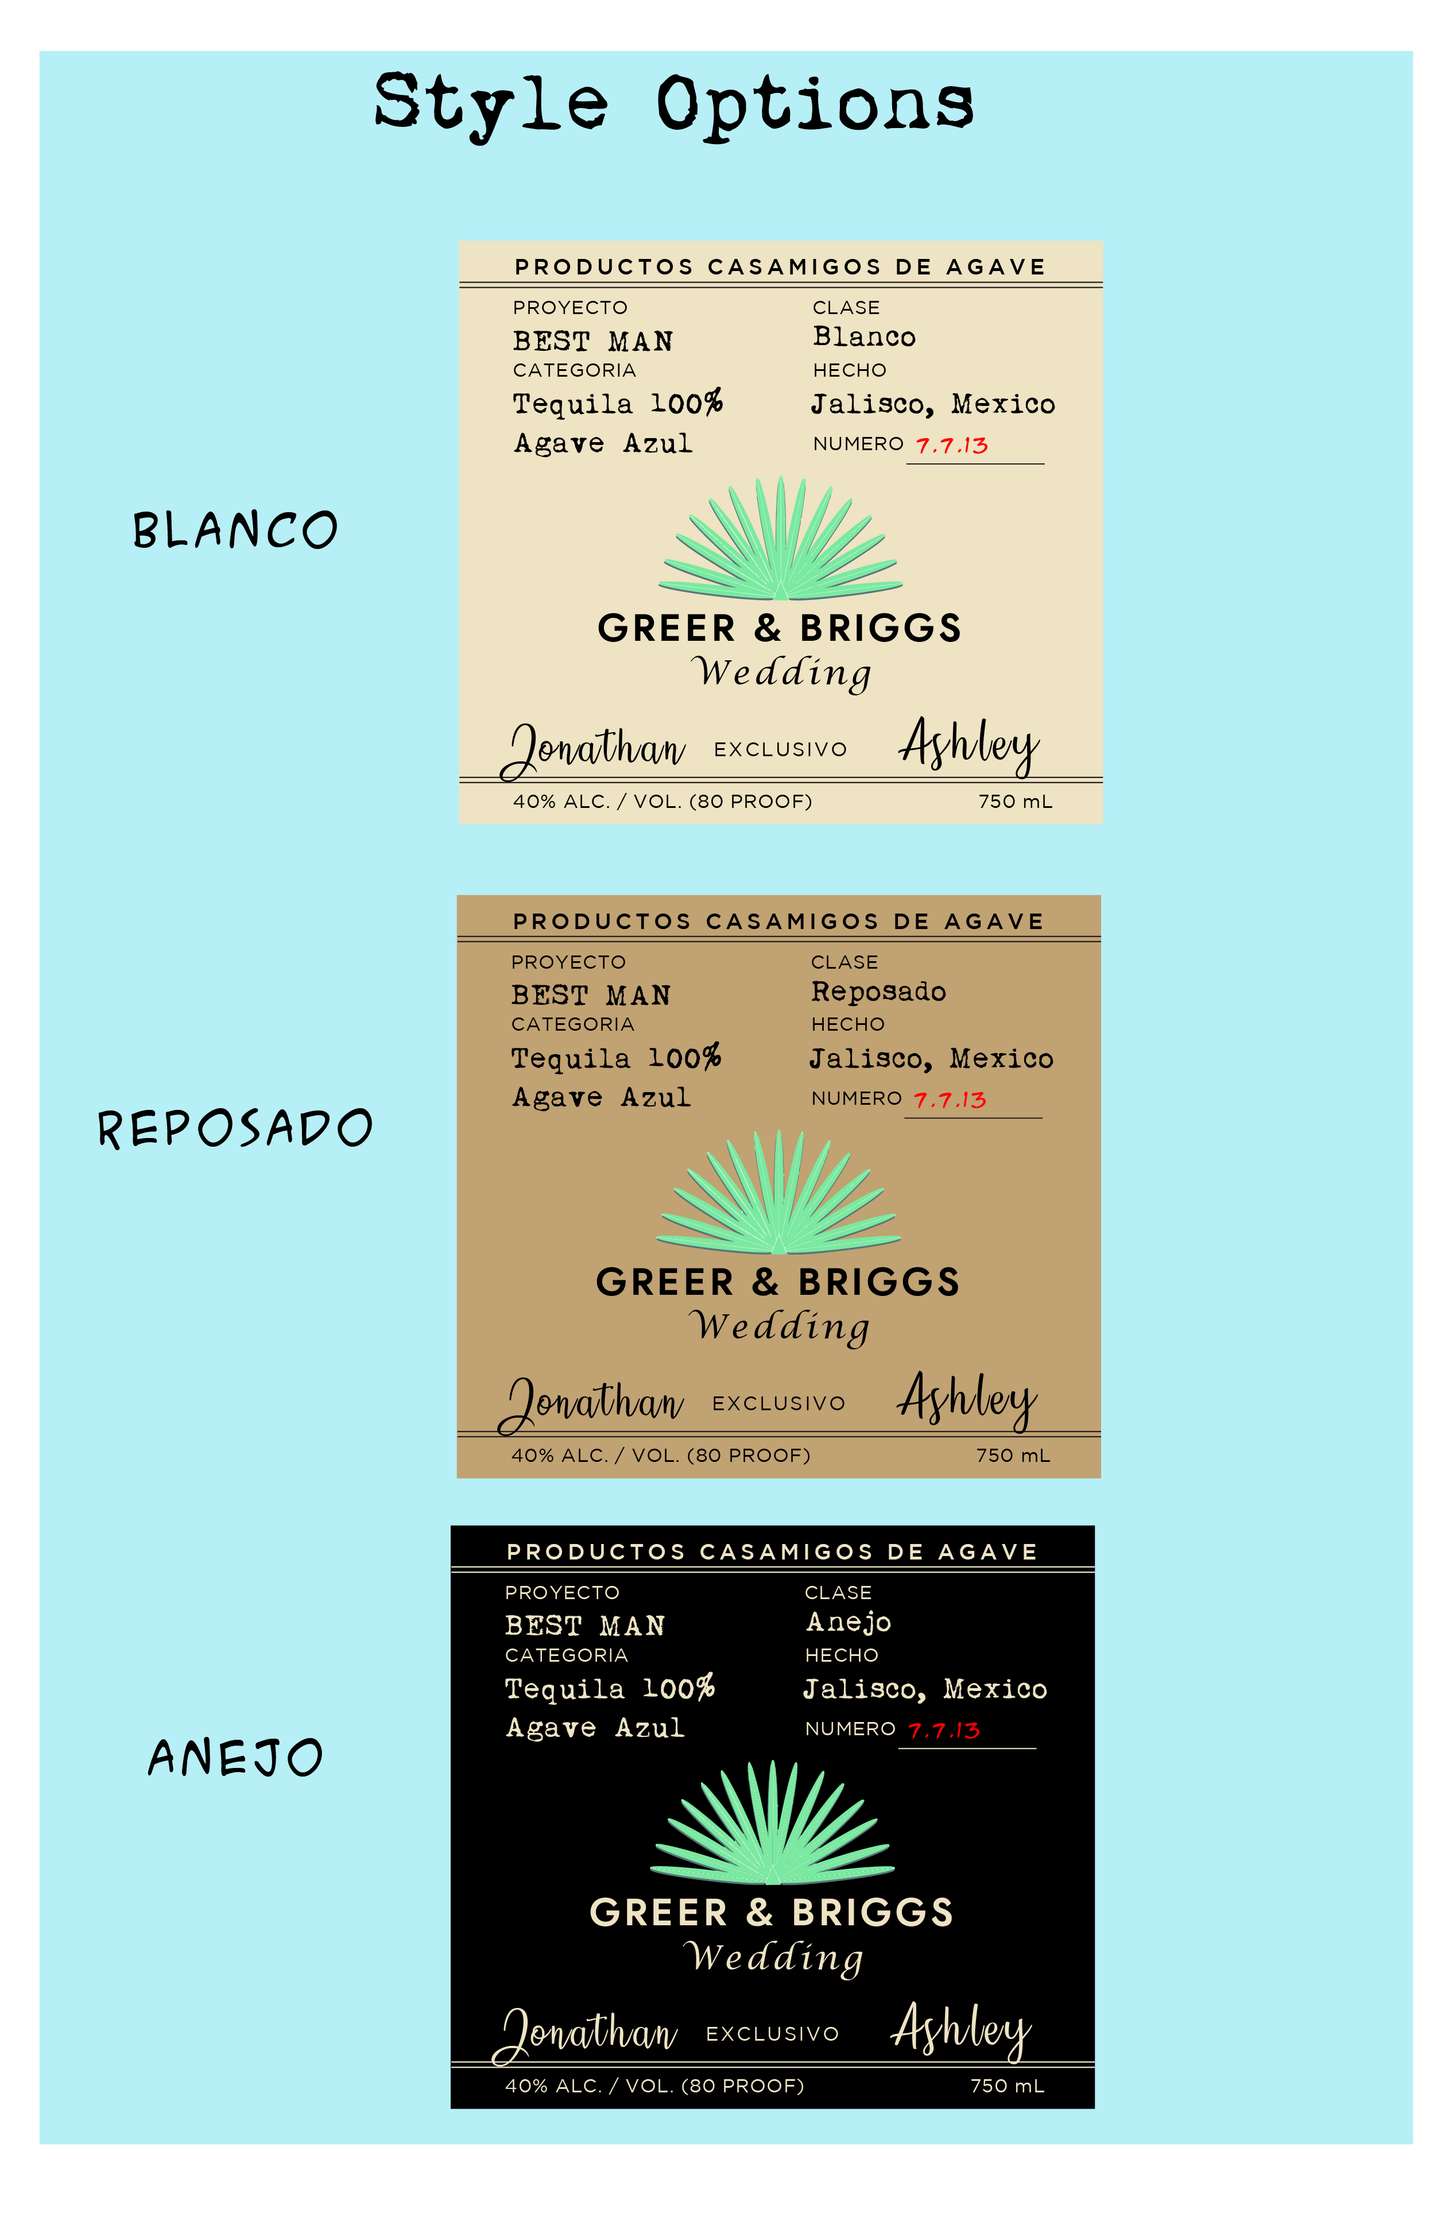 Personalized Label to fit Casamigos Bottles